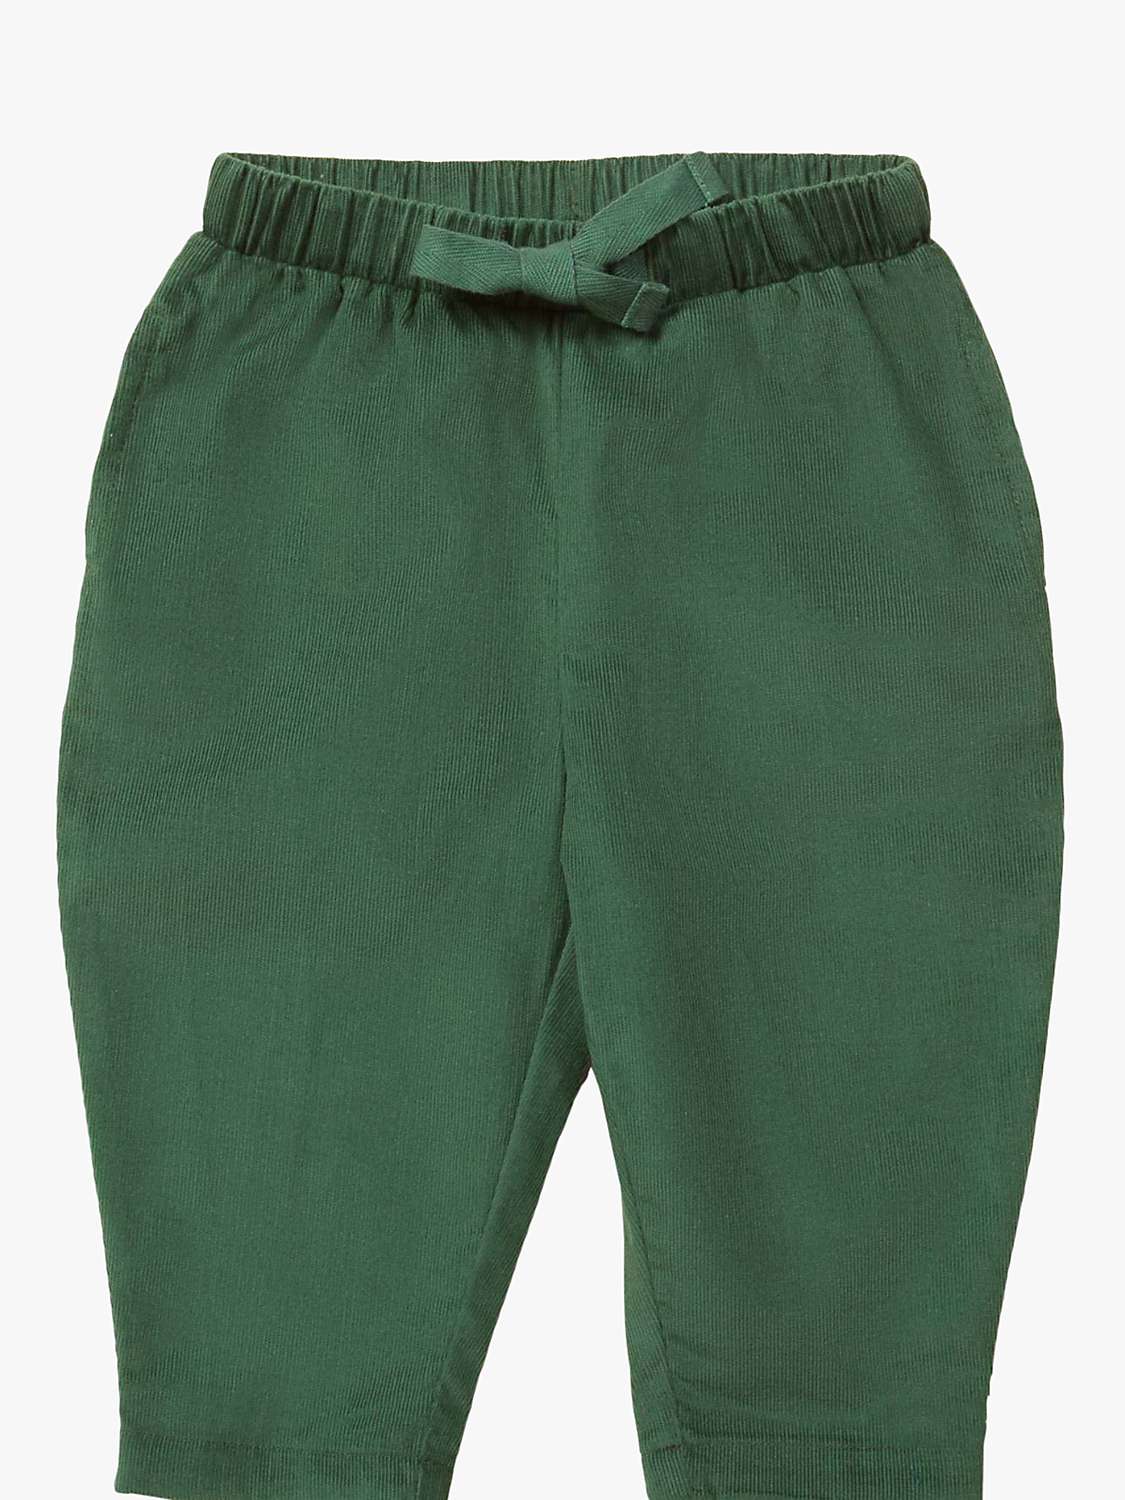 Buy Little Green Radicals Kids' Corduroy Comfy Trousers Online at johnlewis.com